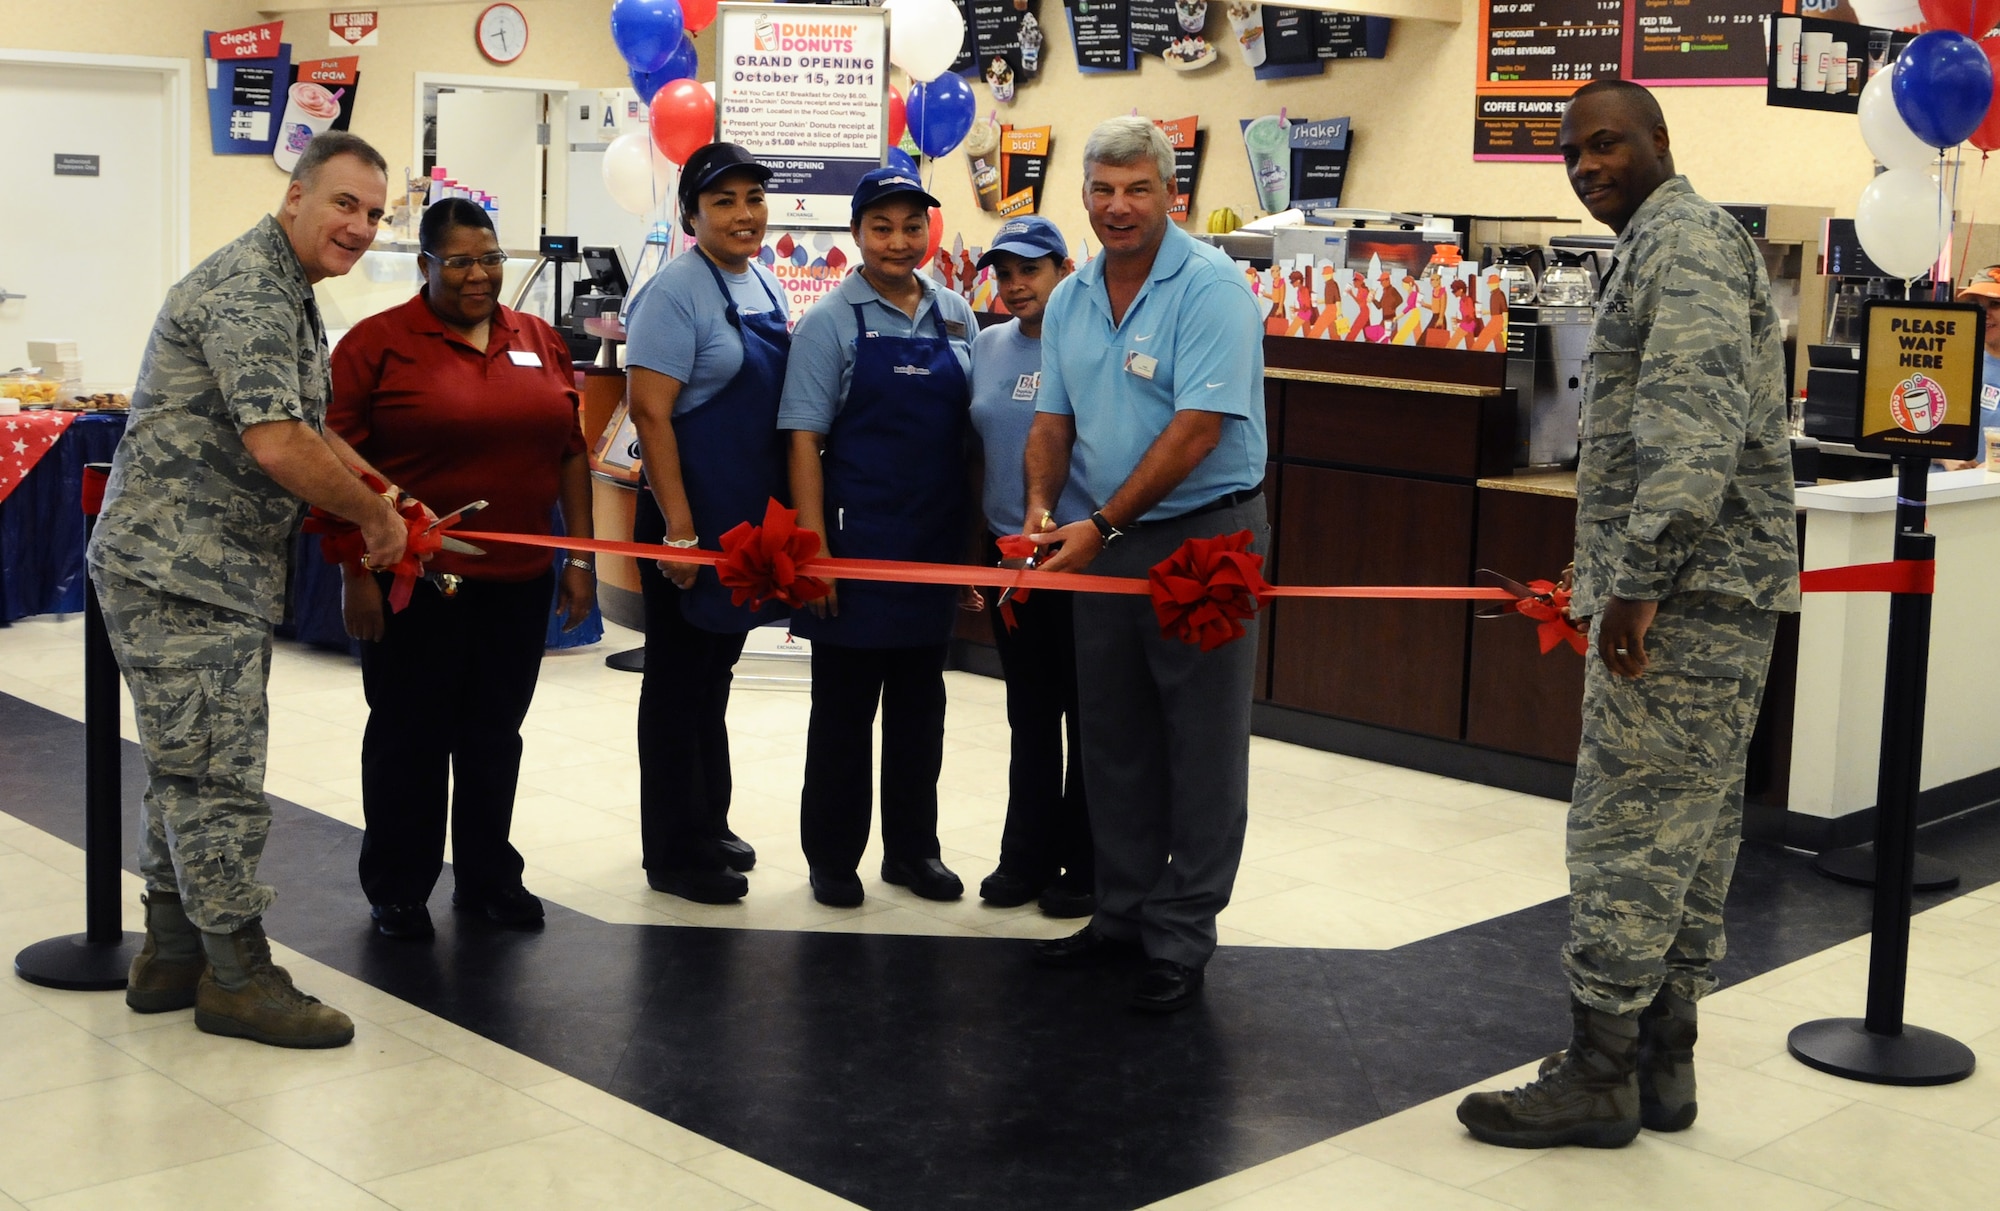 ANDERSEN AIR FORCE BASE, Guam—Leadership from Andersen cut the ceremonial ribbon with Exchange personnel during the grand opening of a Dunkin Donuts coffee shop here, Oct. 14. The Army and Air Force Exchange Service (AAFES) opted to put in a coffee shop after a receiving positive input from the base community. (U.S. Air Force photo by Senior Airman Benjamin Wiseman/Released)